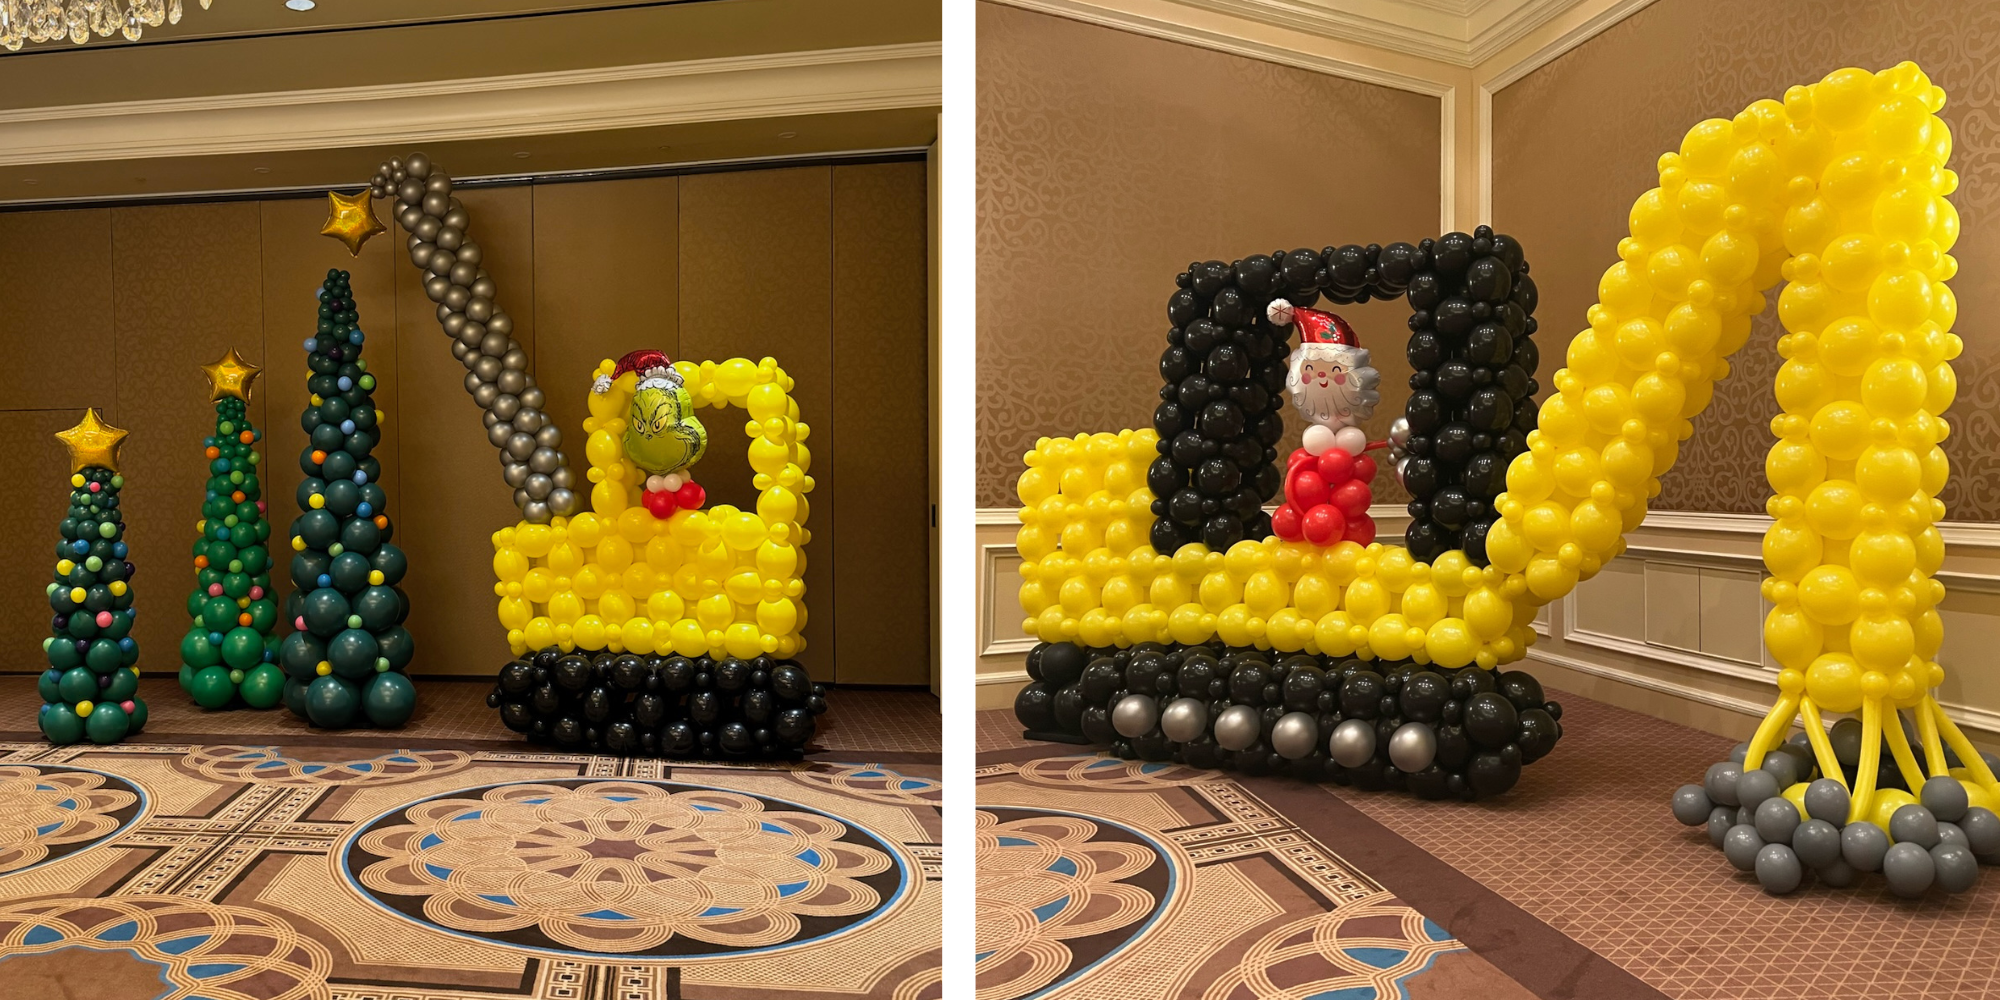 Utah Balloon Sculptures fill the space at a corporate Christmas party held at the Grand America in Salt Lake City, Utah